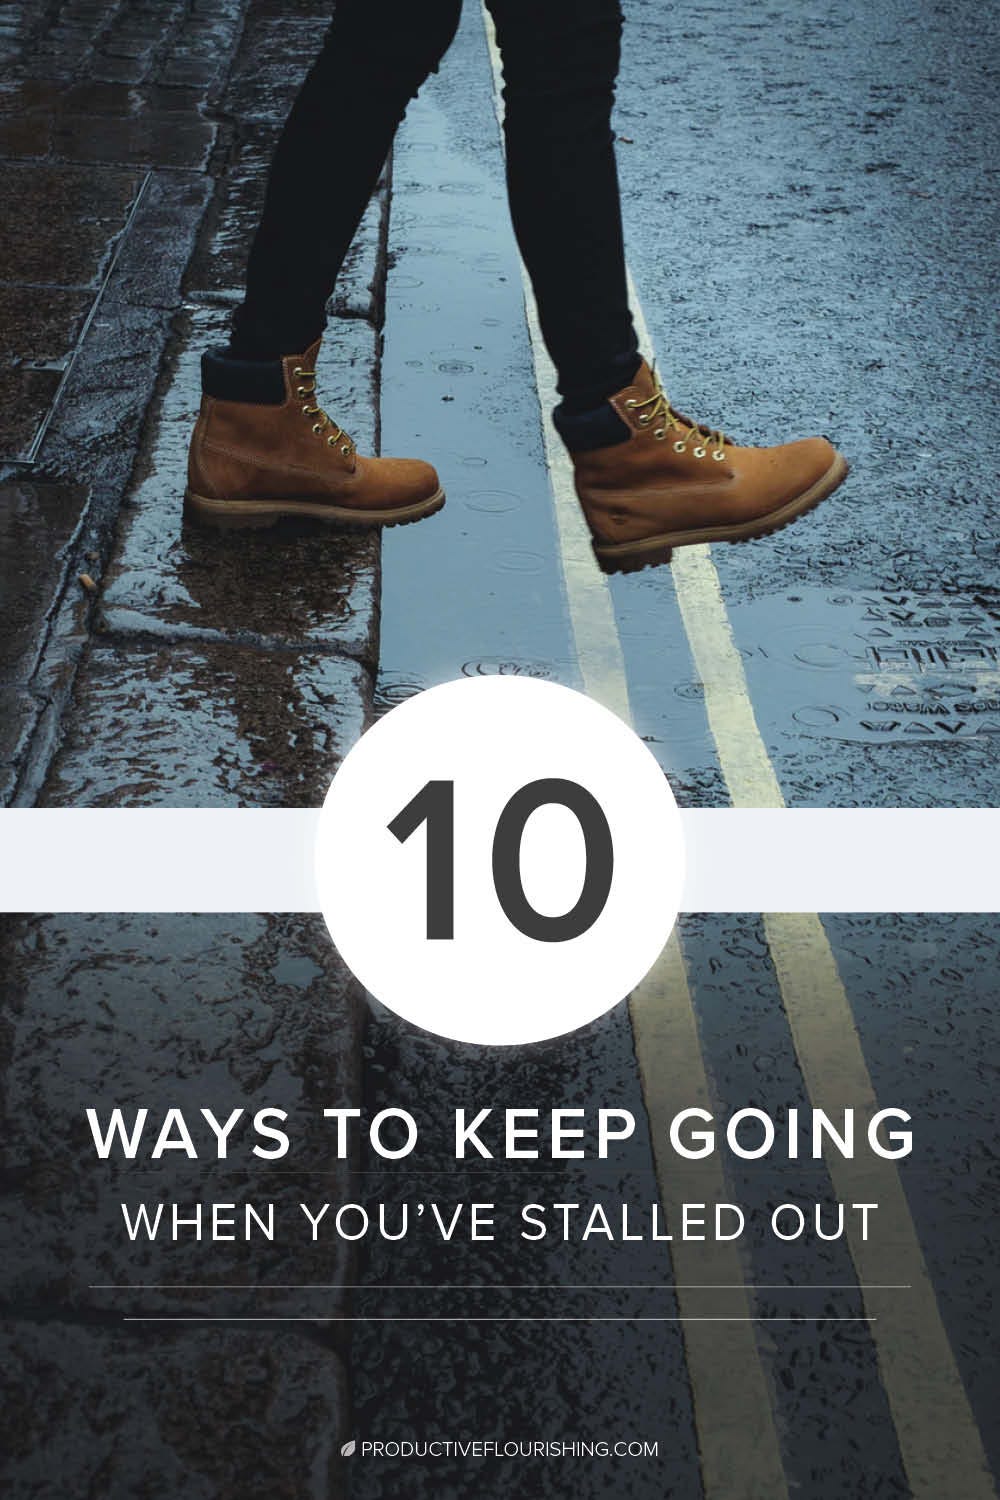 Here are 10 tips to keep going and maintain your momentum when you find yourself utterly drained, unable to create blog posts or be creative at all. #entrepreneur #successmindset #productiveflourishing